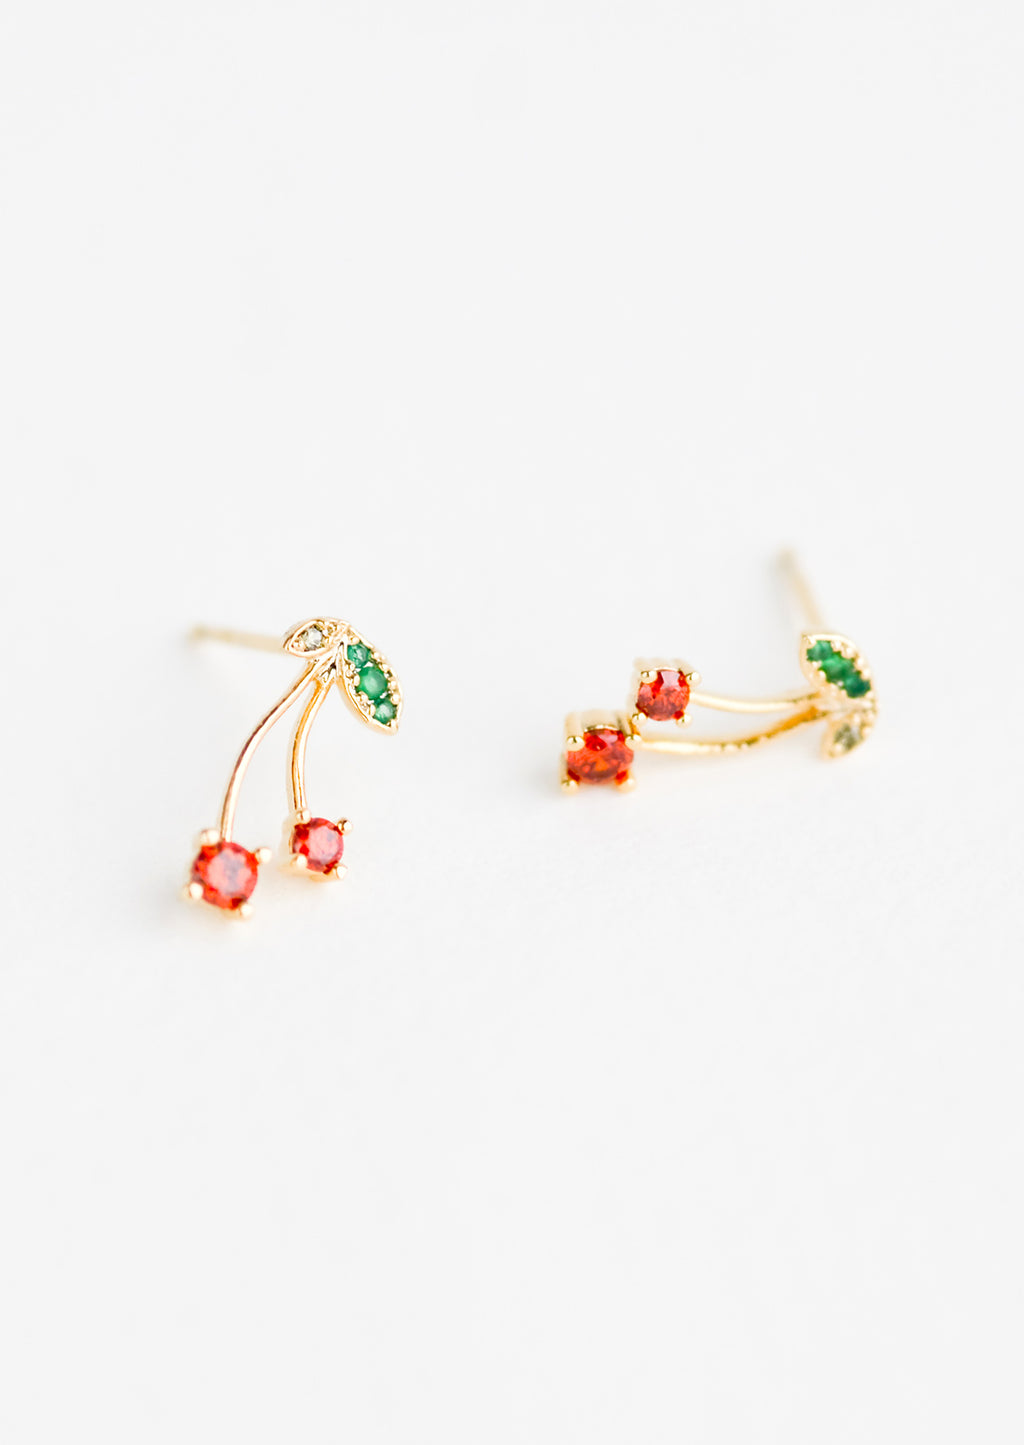 3: A pair of gold stud earrings in cherry design.